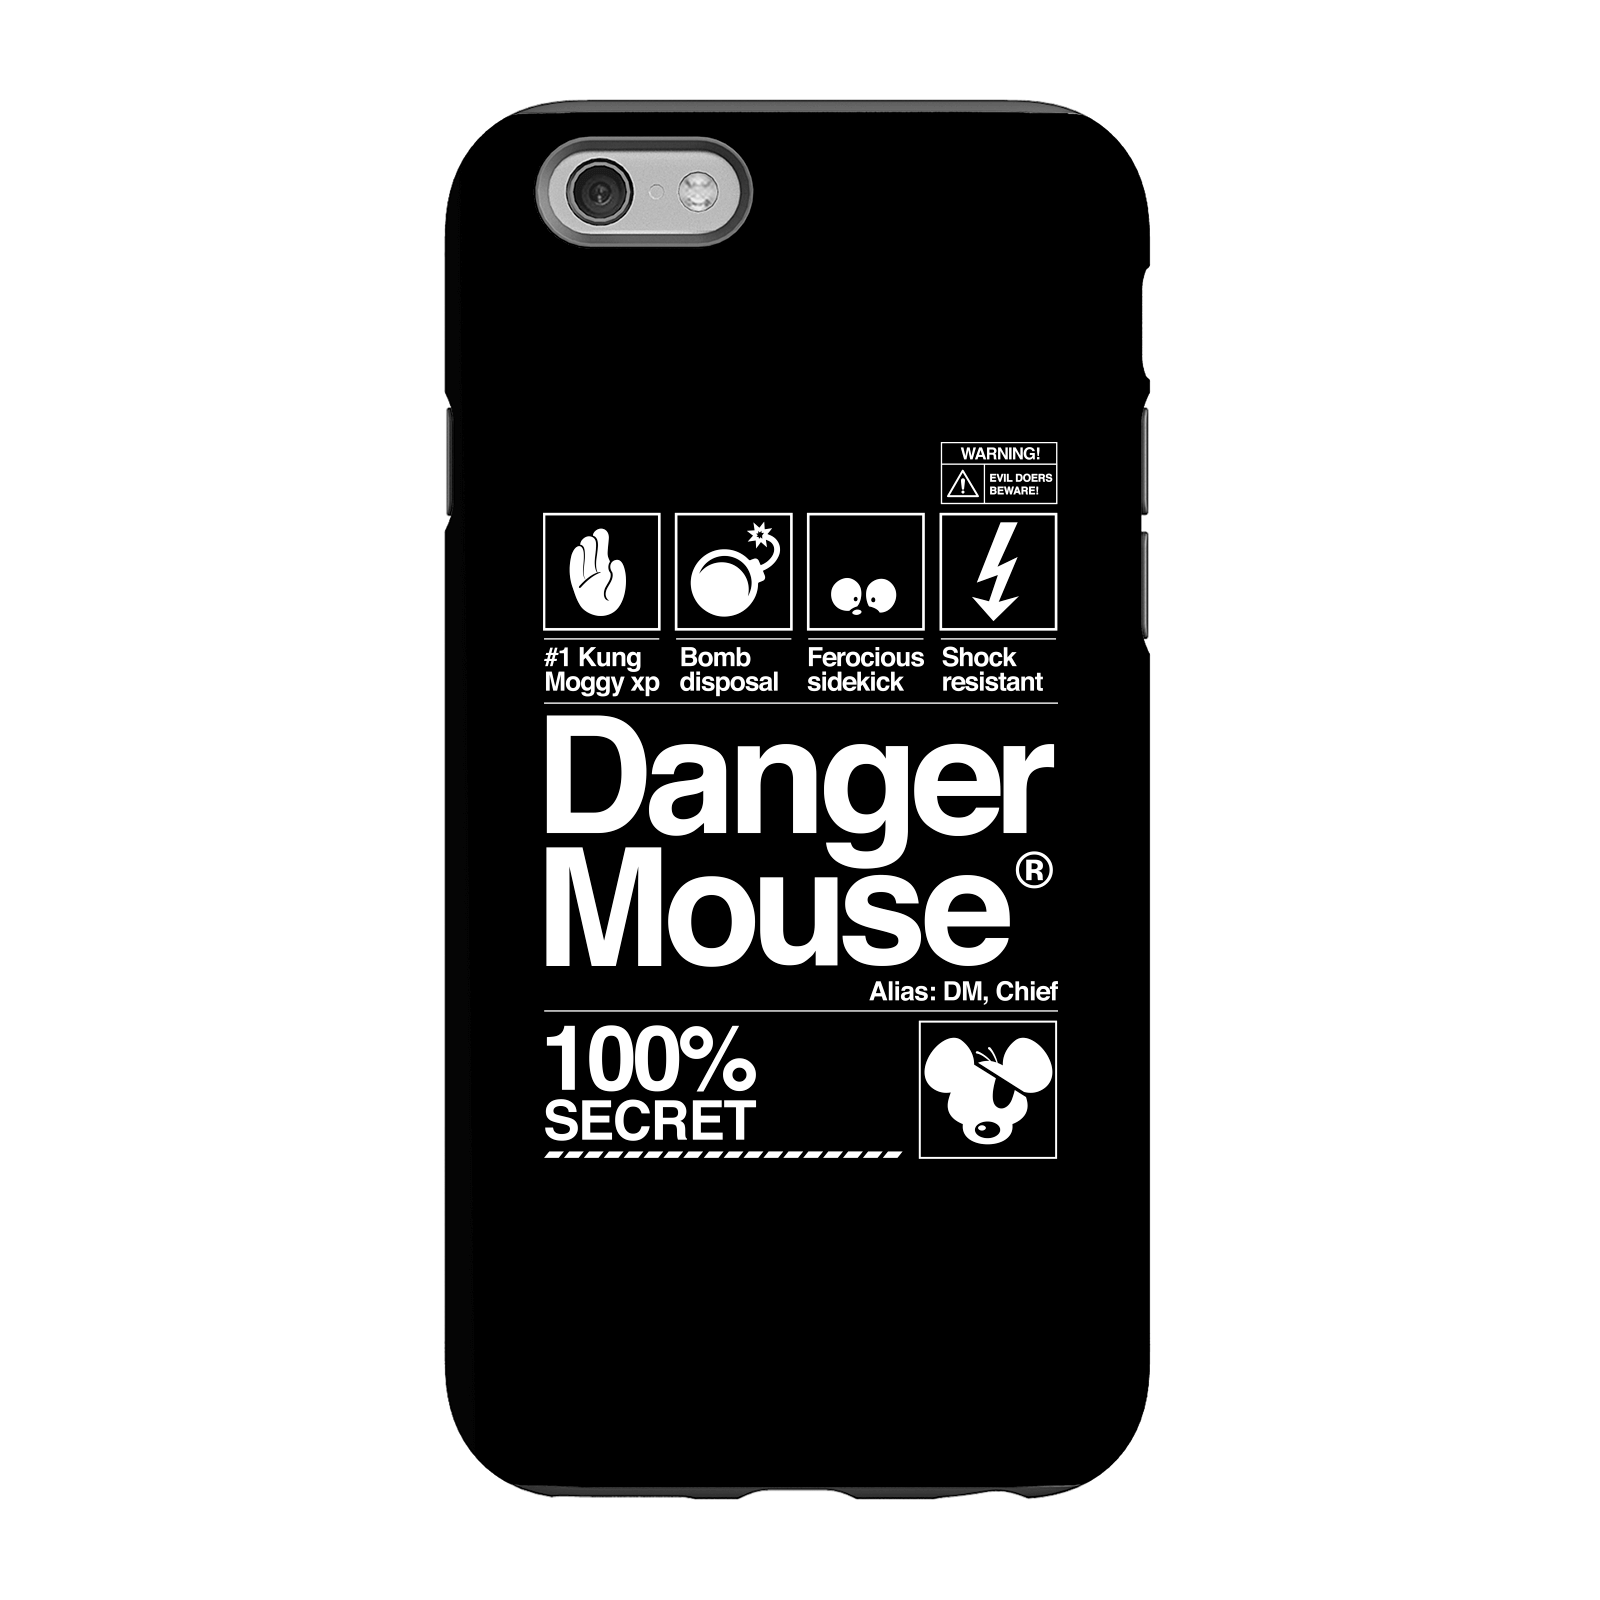 Danger Mouse 100% Secret Phone Case for iPhone and Android - iPhone 6 - Tough Case - Matte